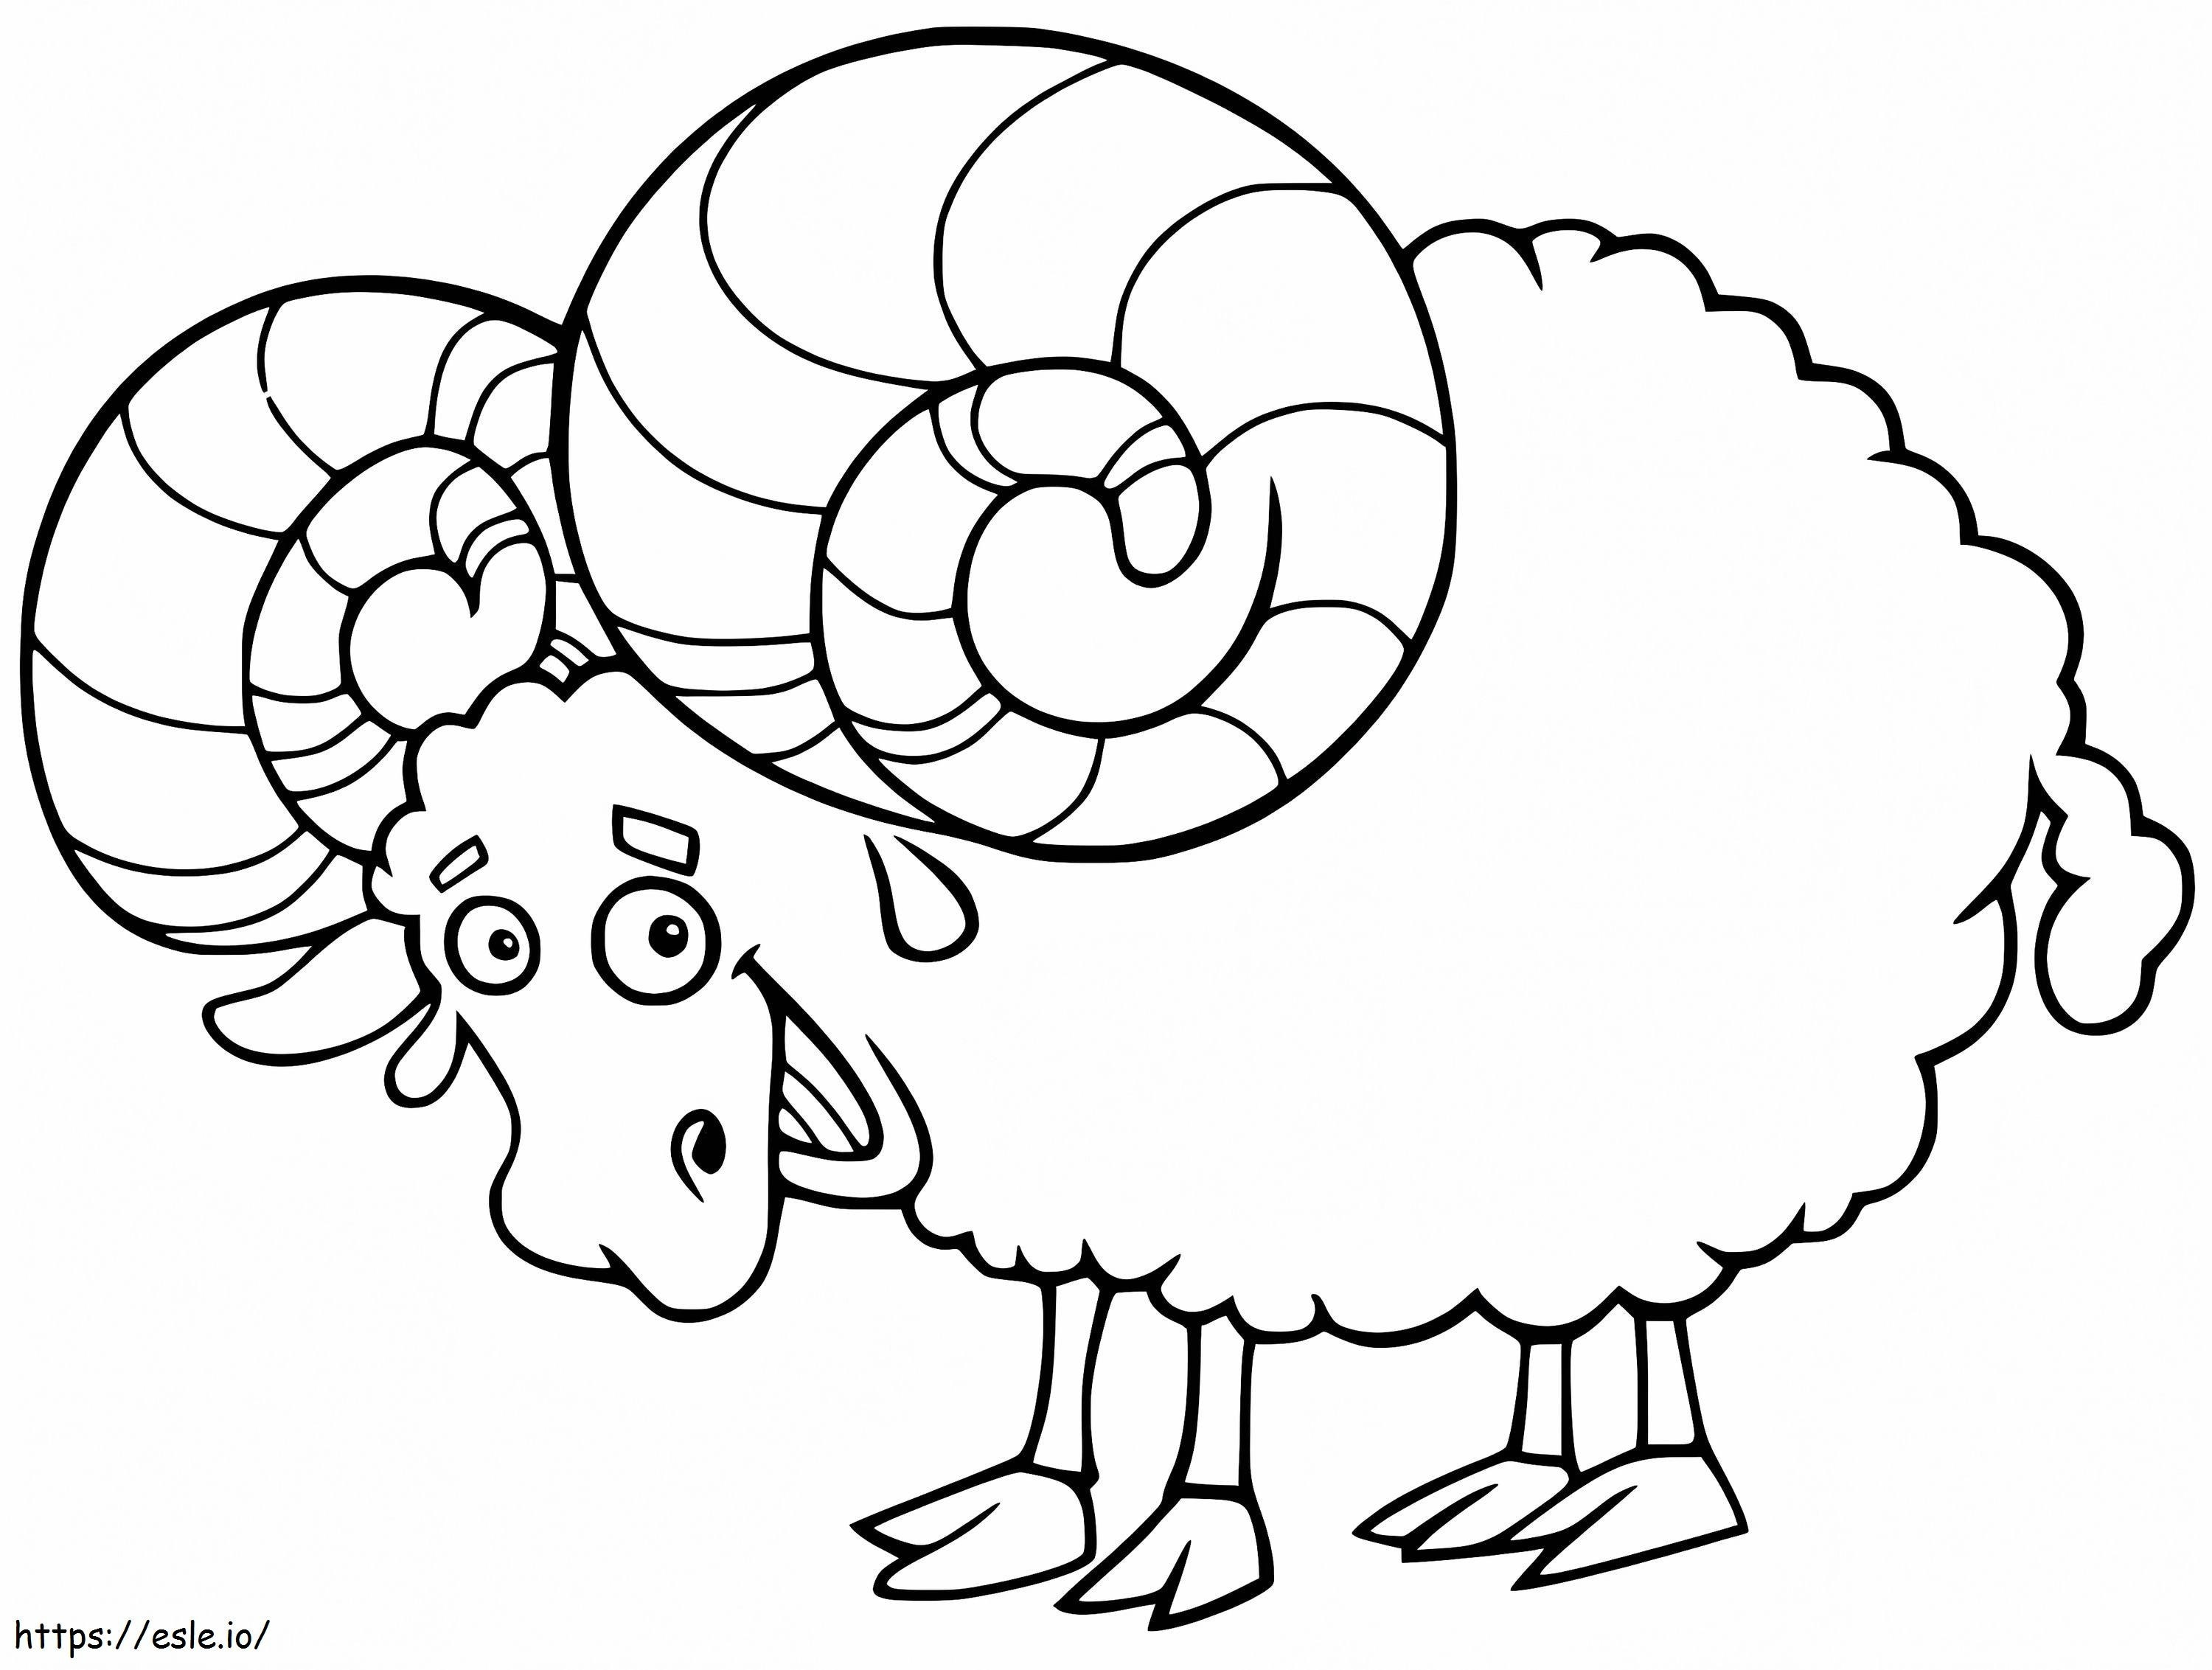 Ram Smiling coloring page